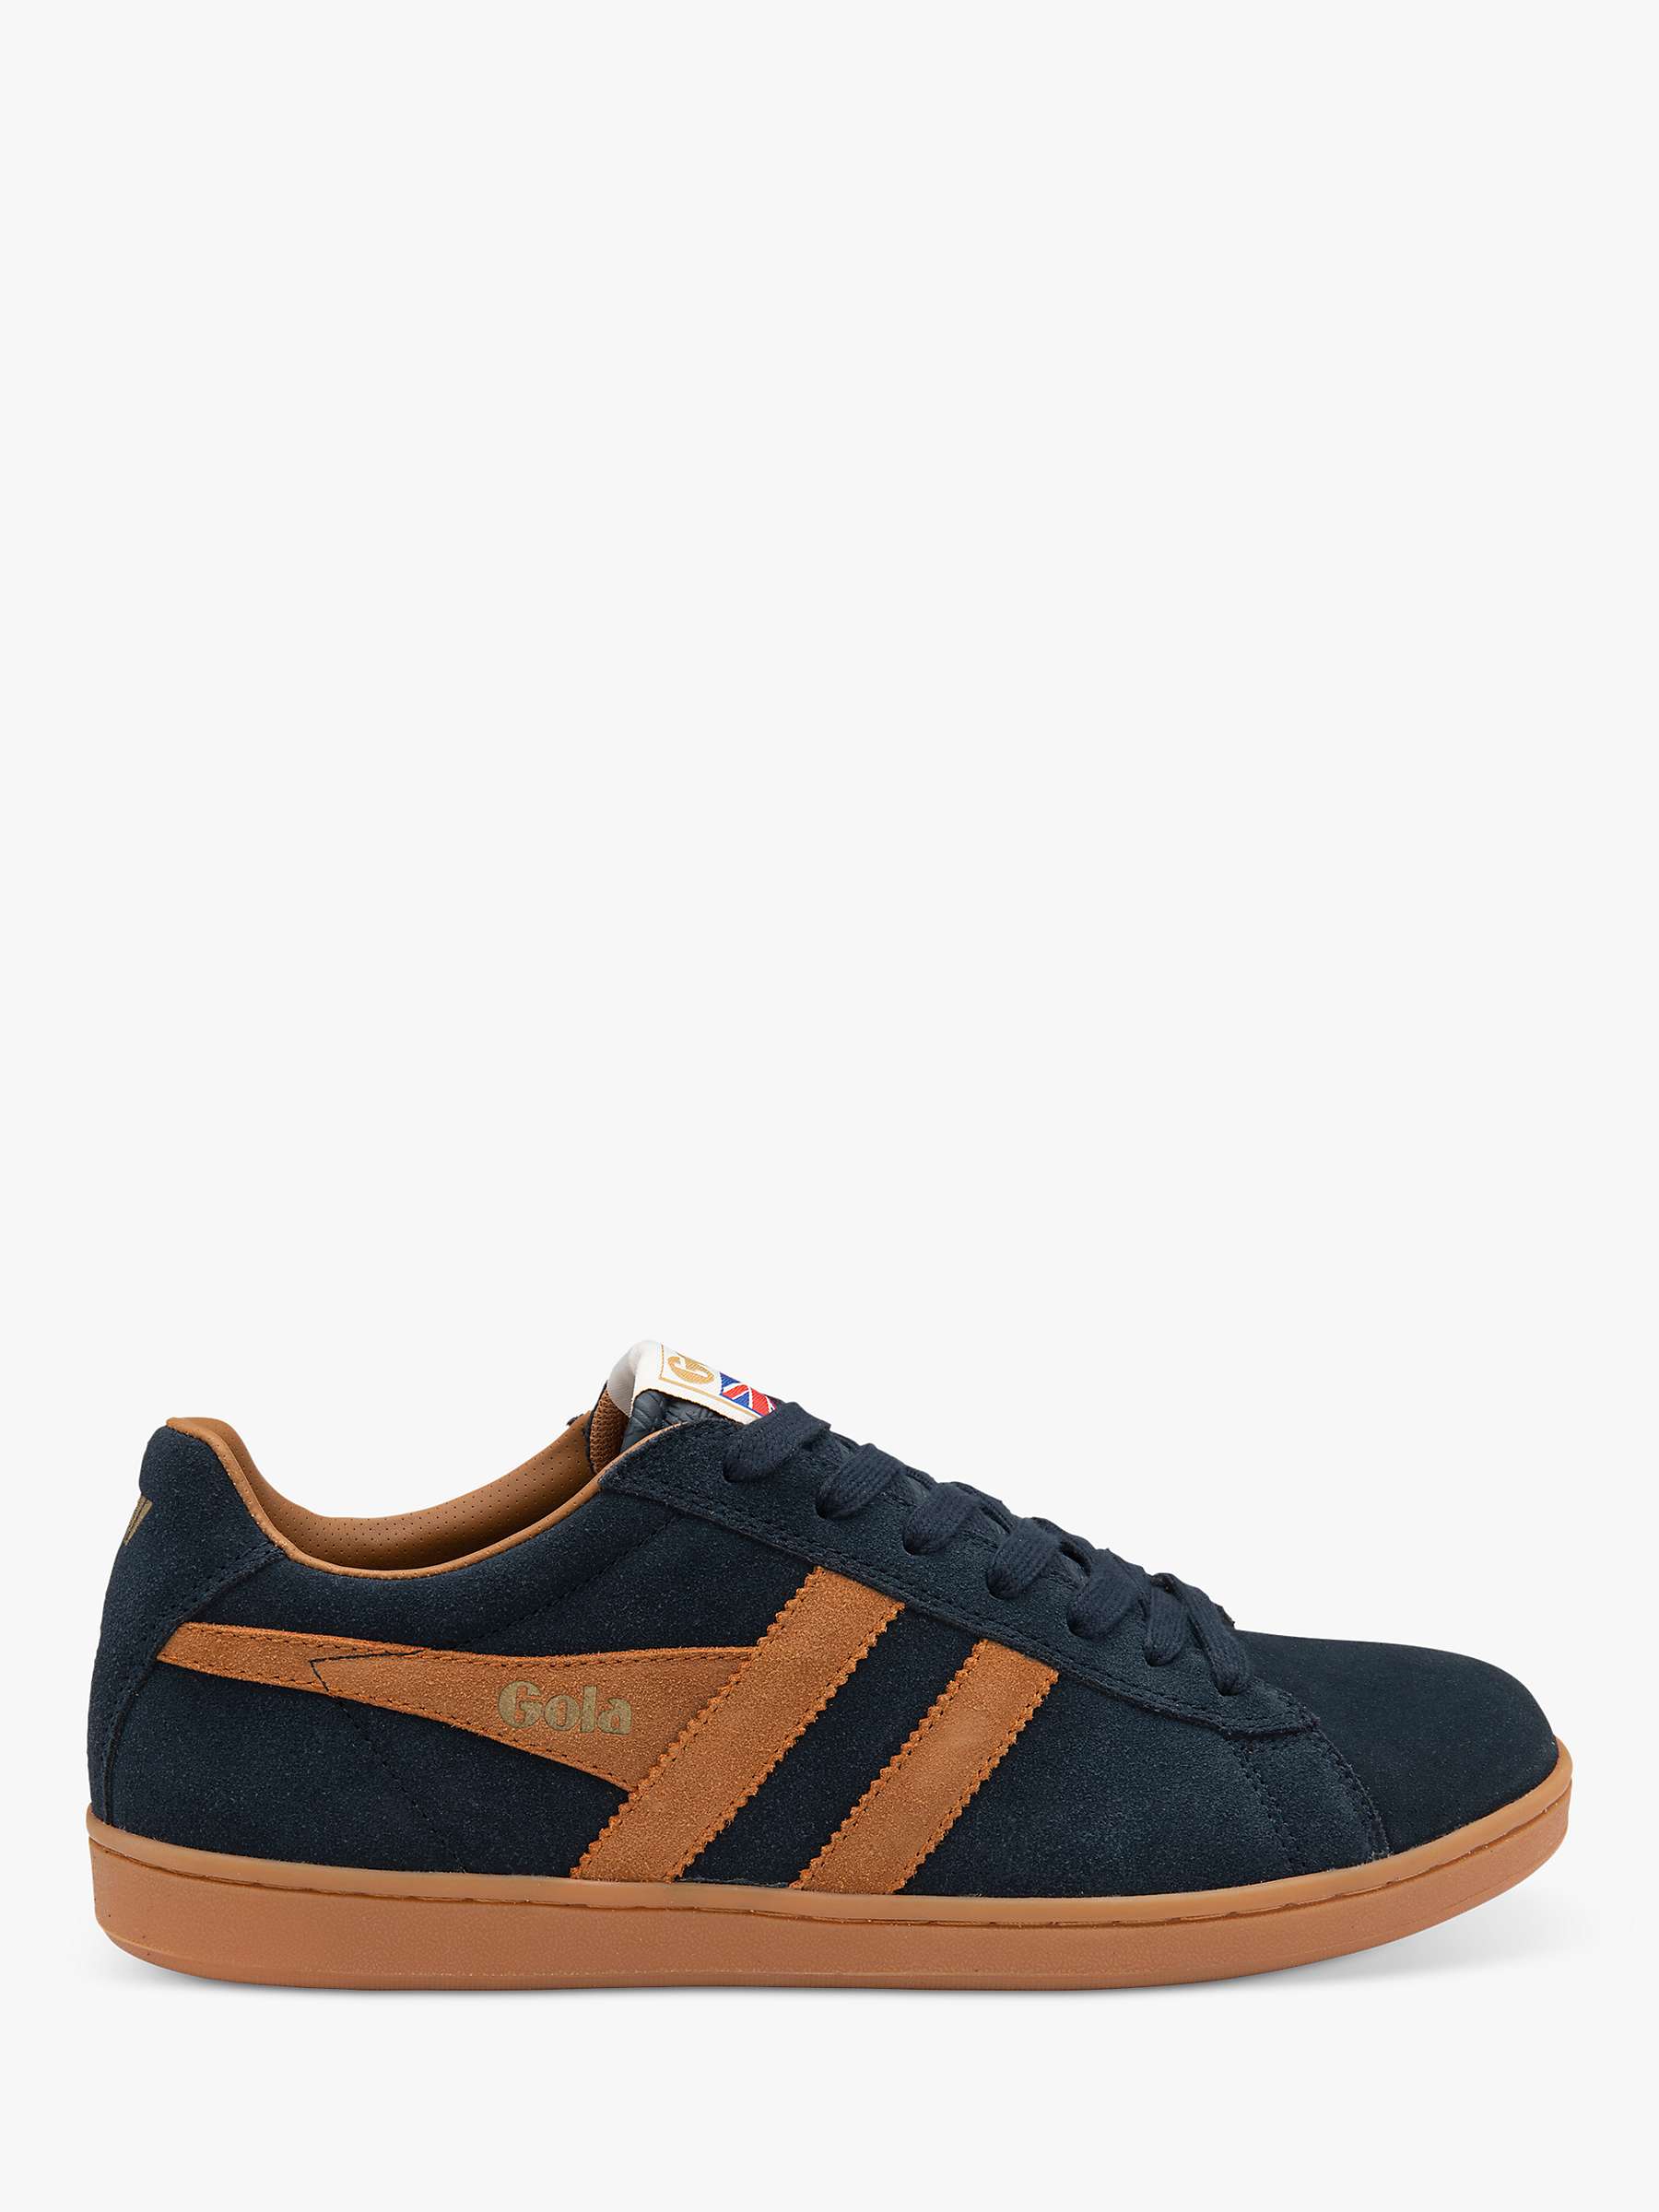 Buy Gola Classics Equipe Suede Lace Up Trainers, Navy/Ginger/Gum Online at johnlewis.com